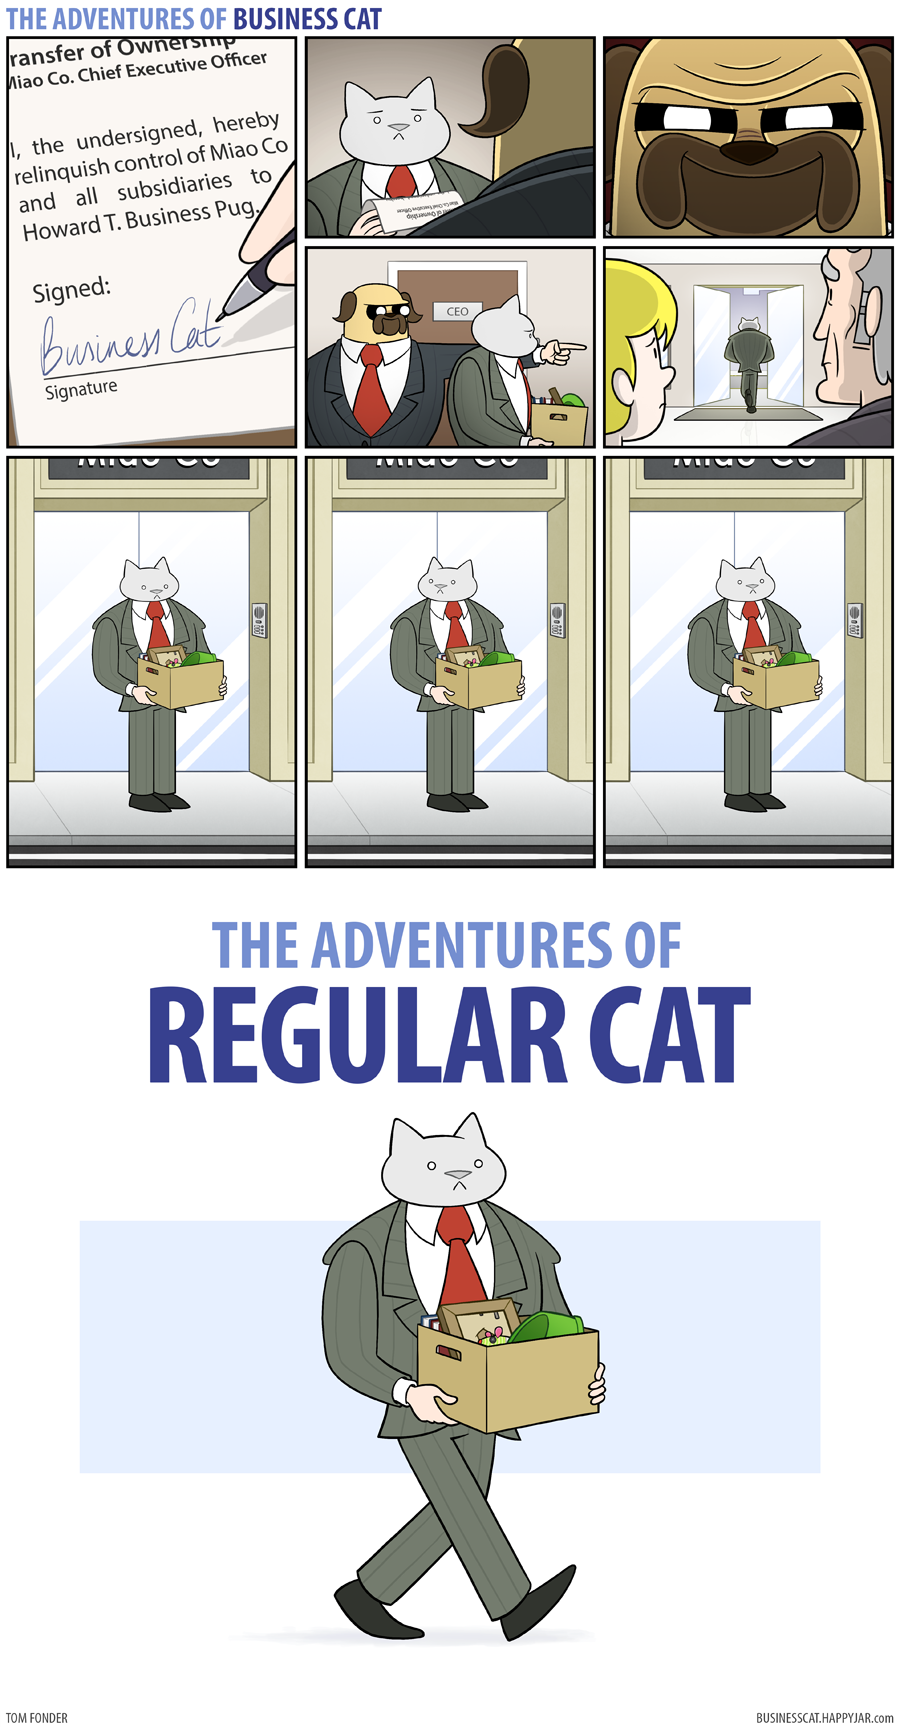 The Adventures of Business Cat - Changeover